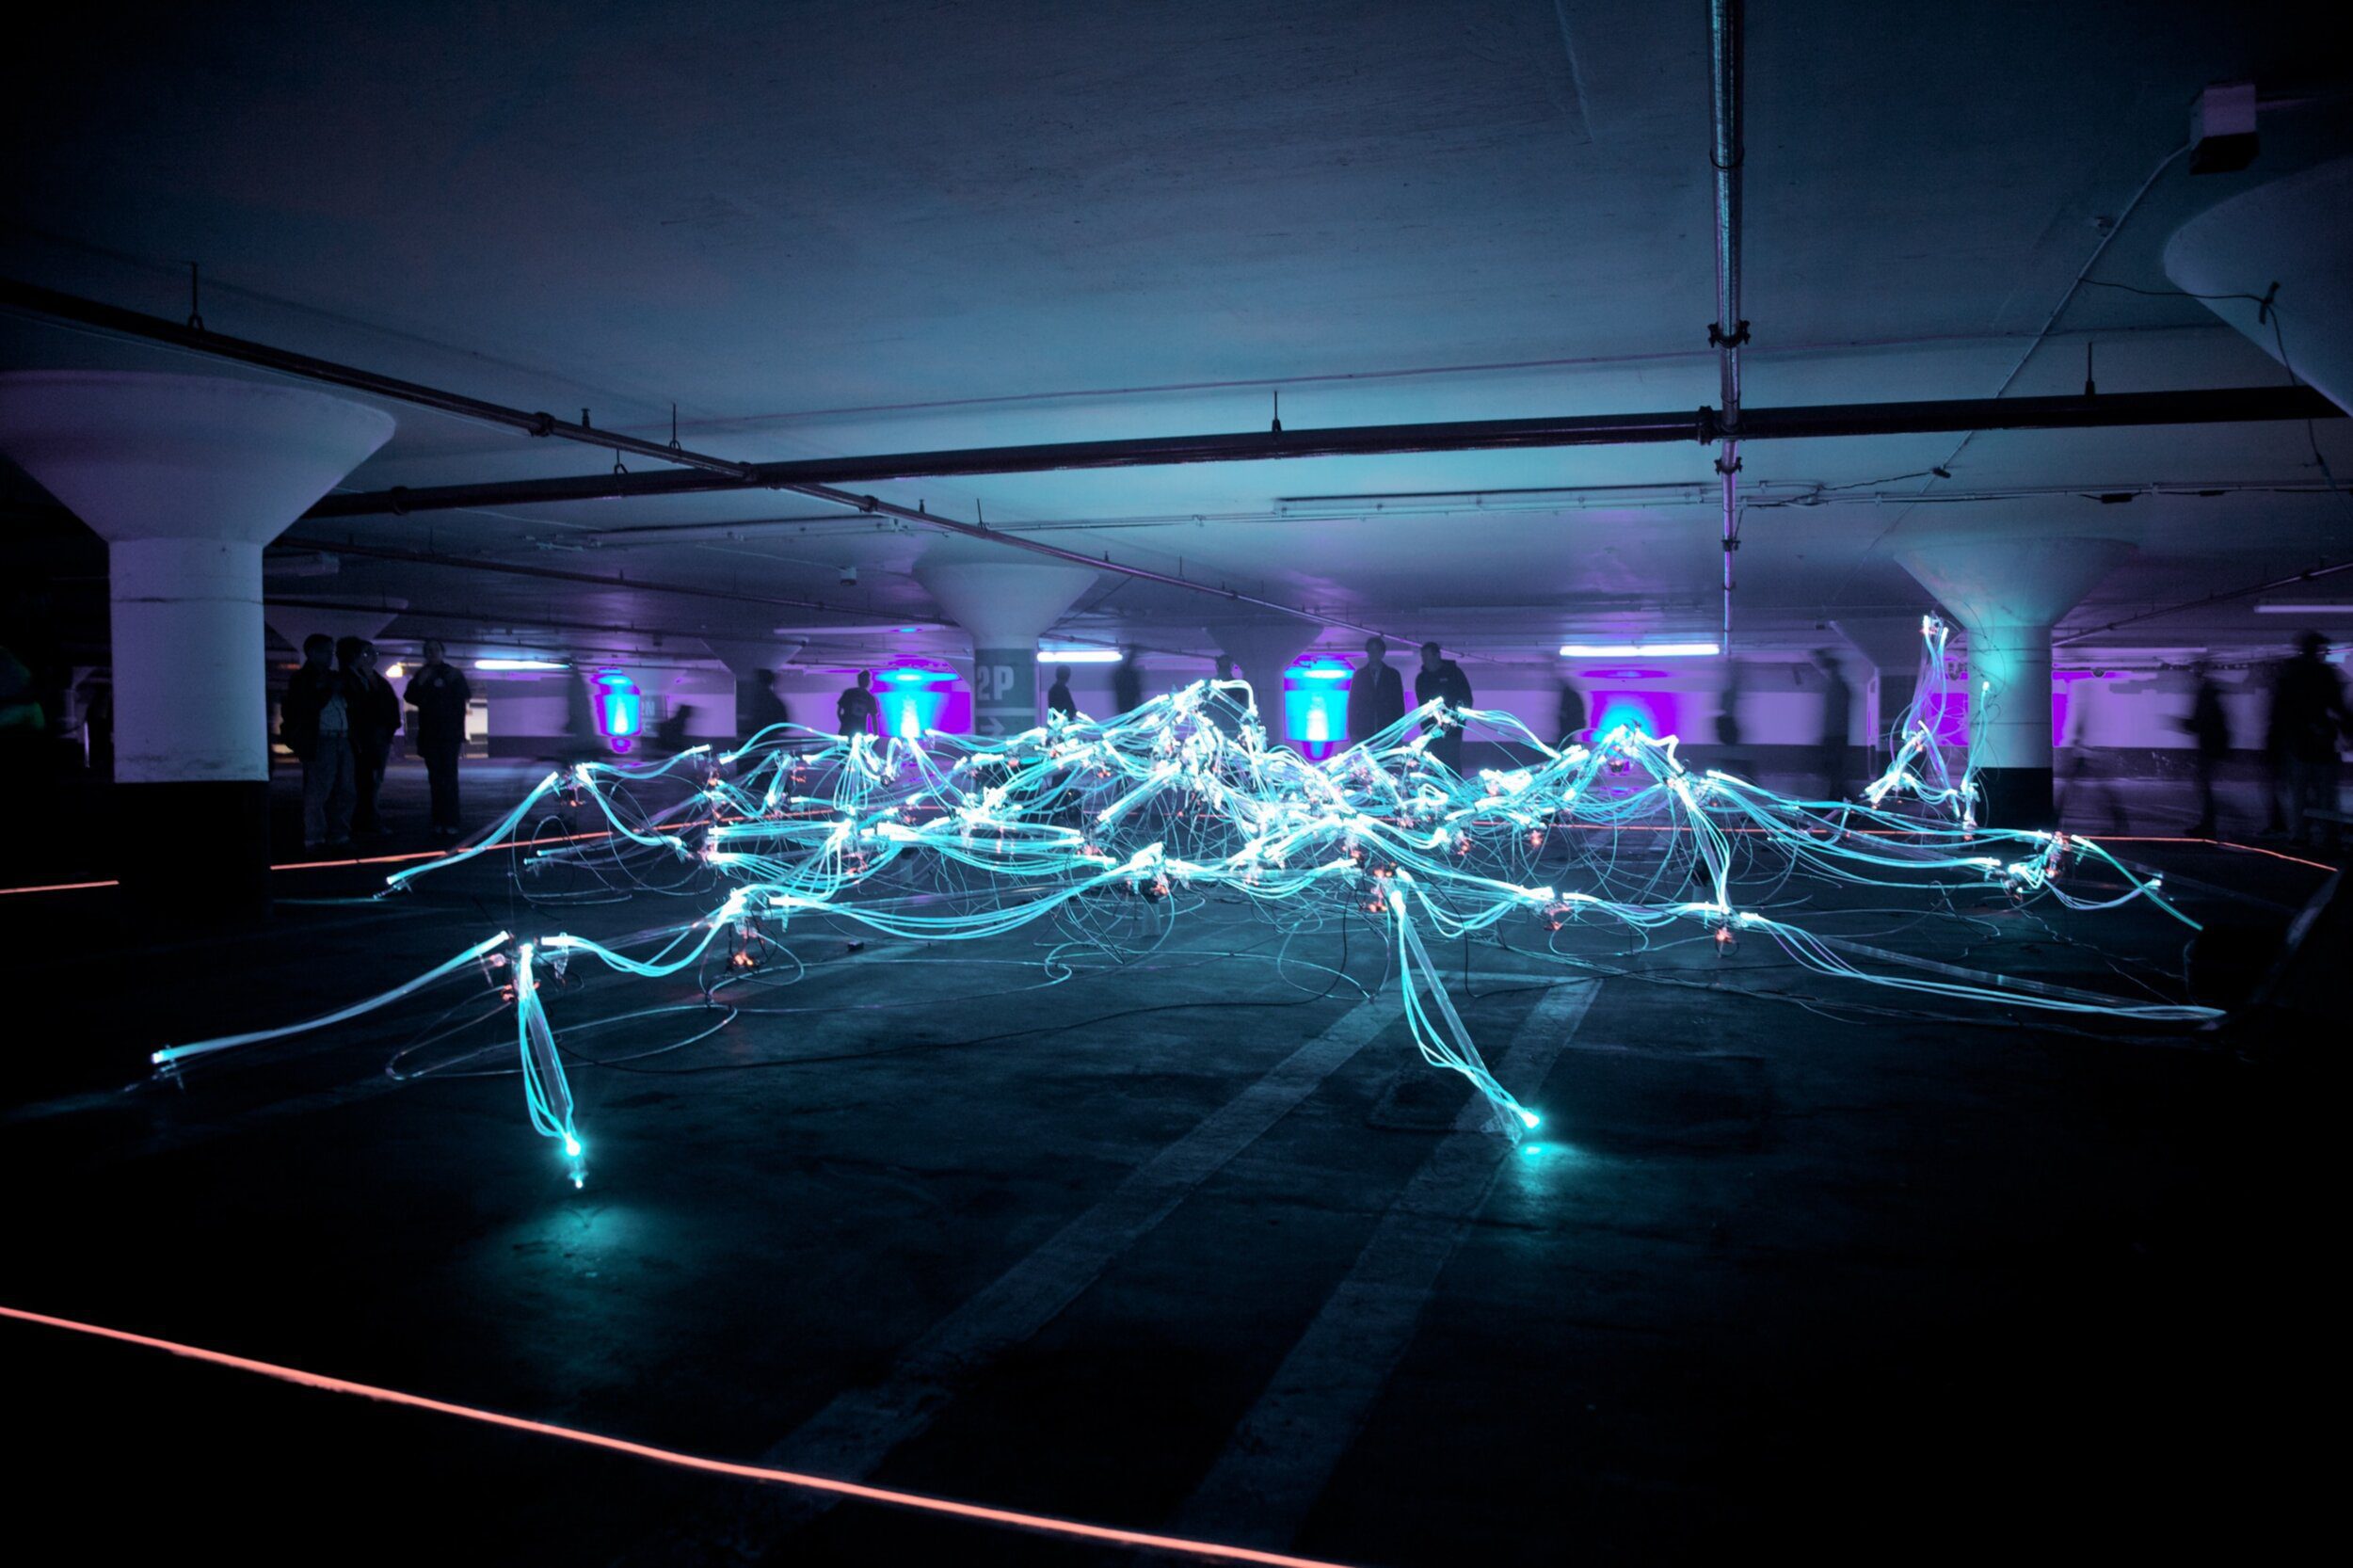 Light installation in dark car park with people watching on